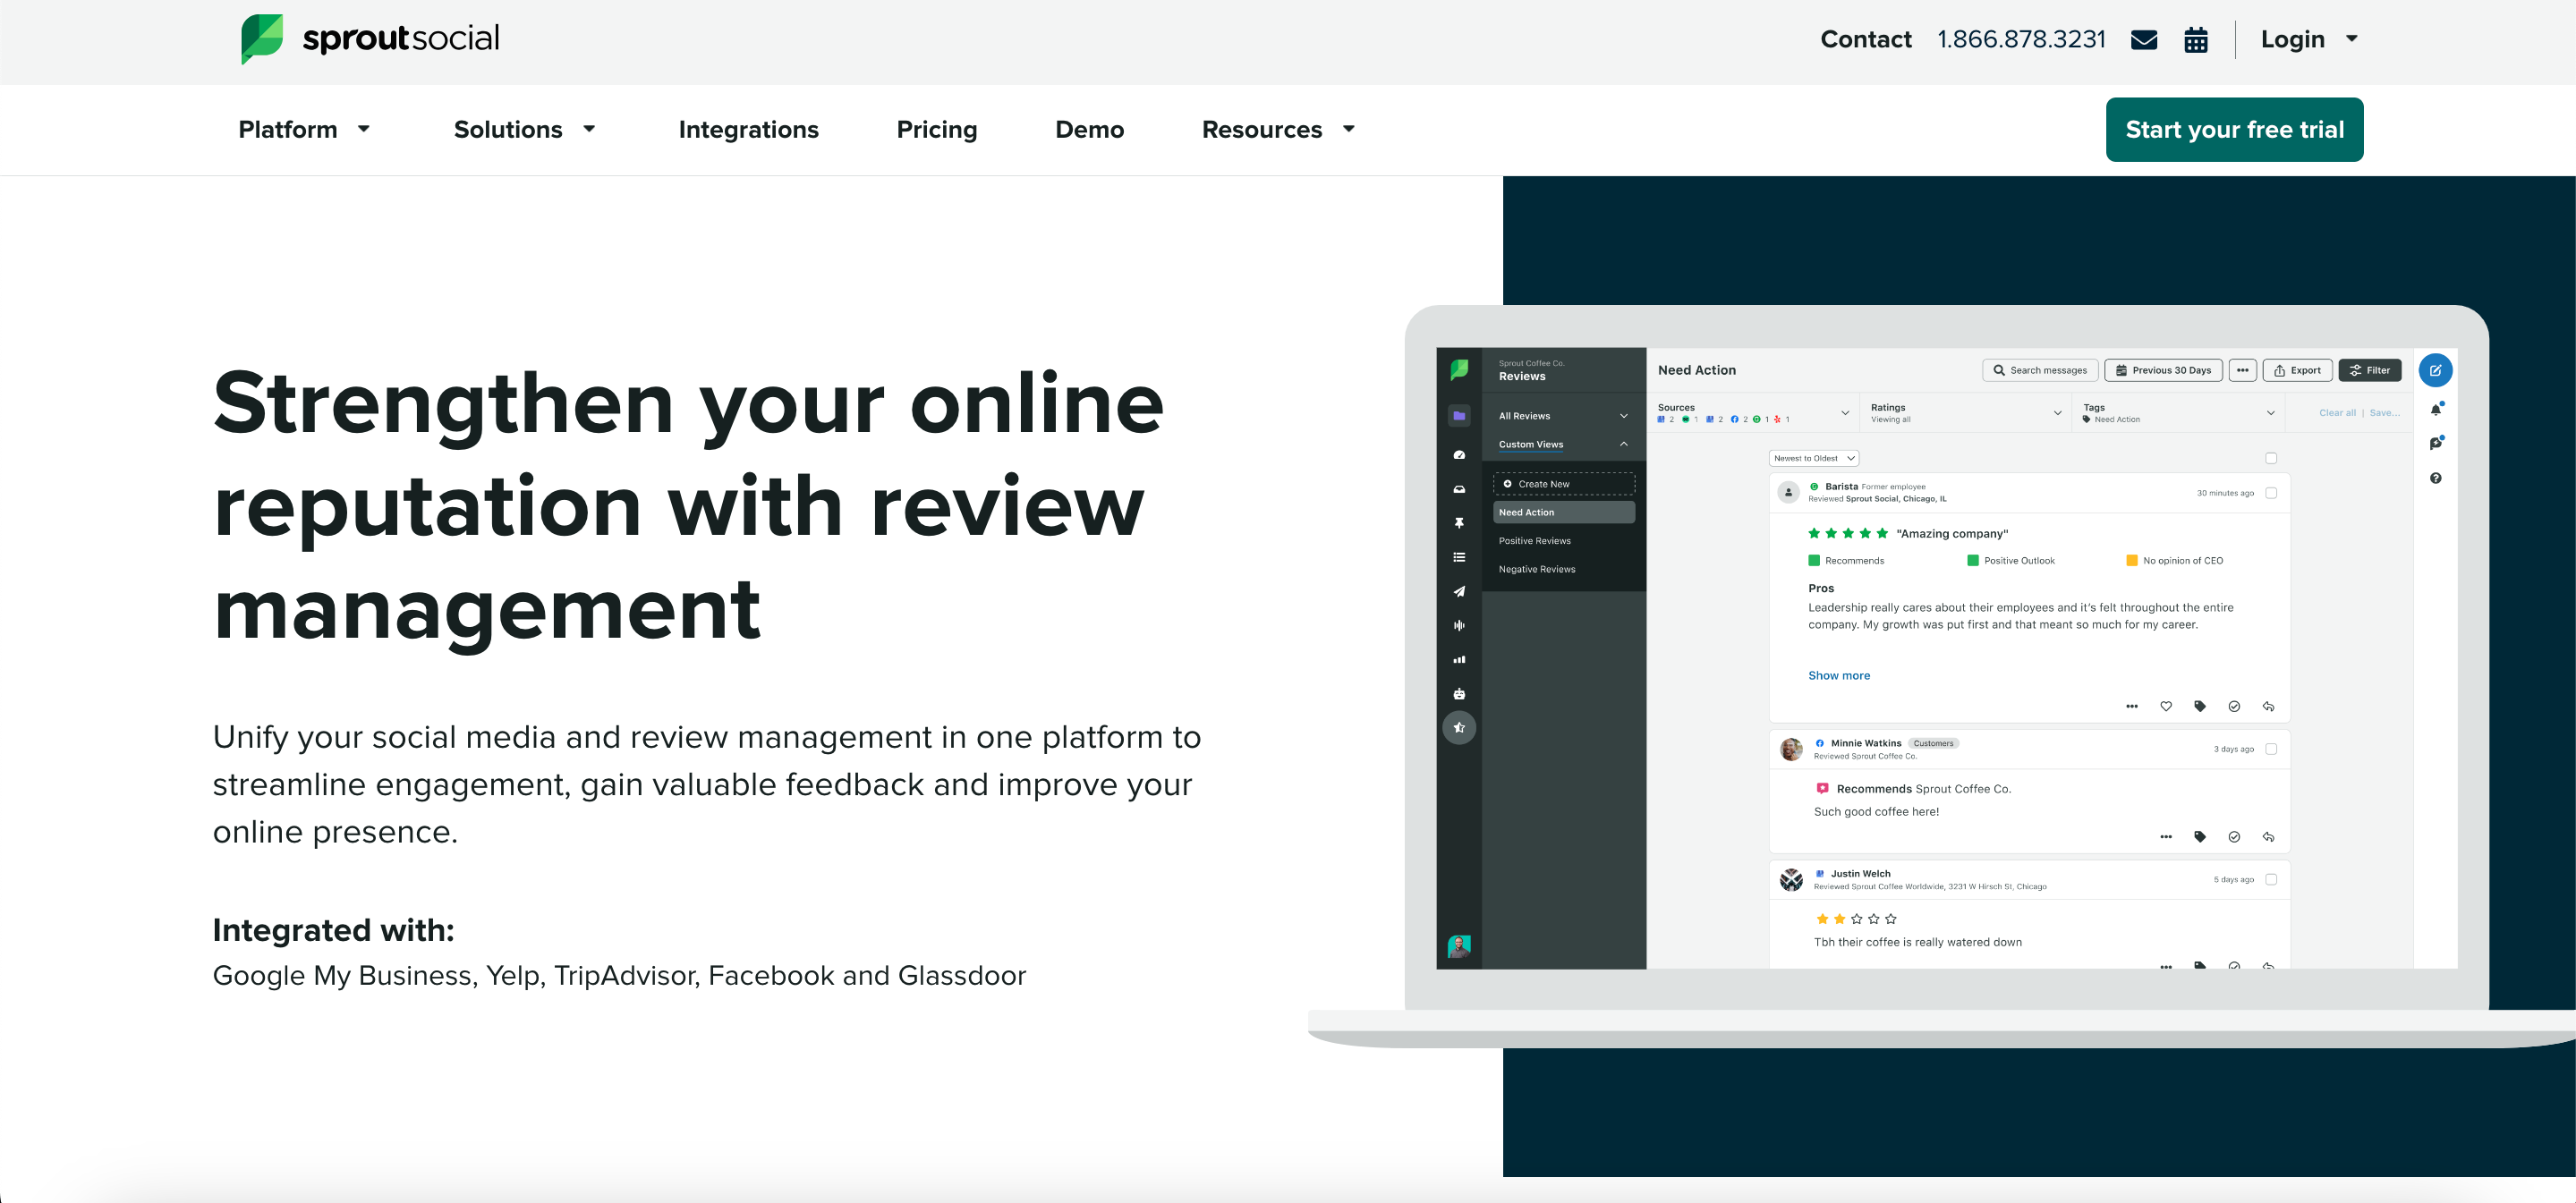 Screenshot of Sprout Social's online reputation management feature page